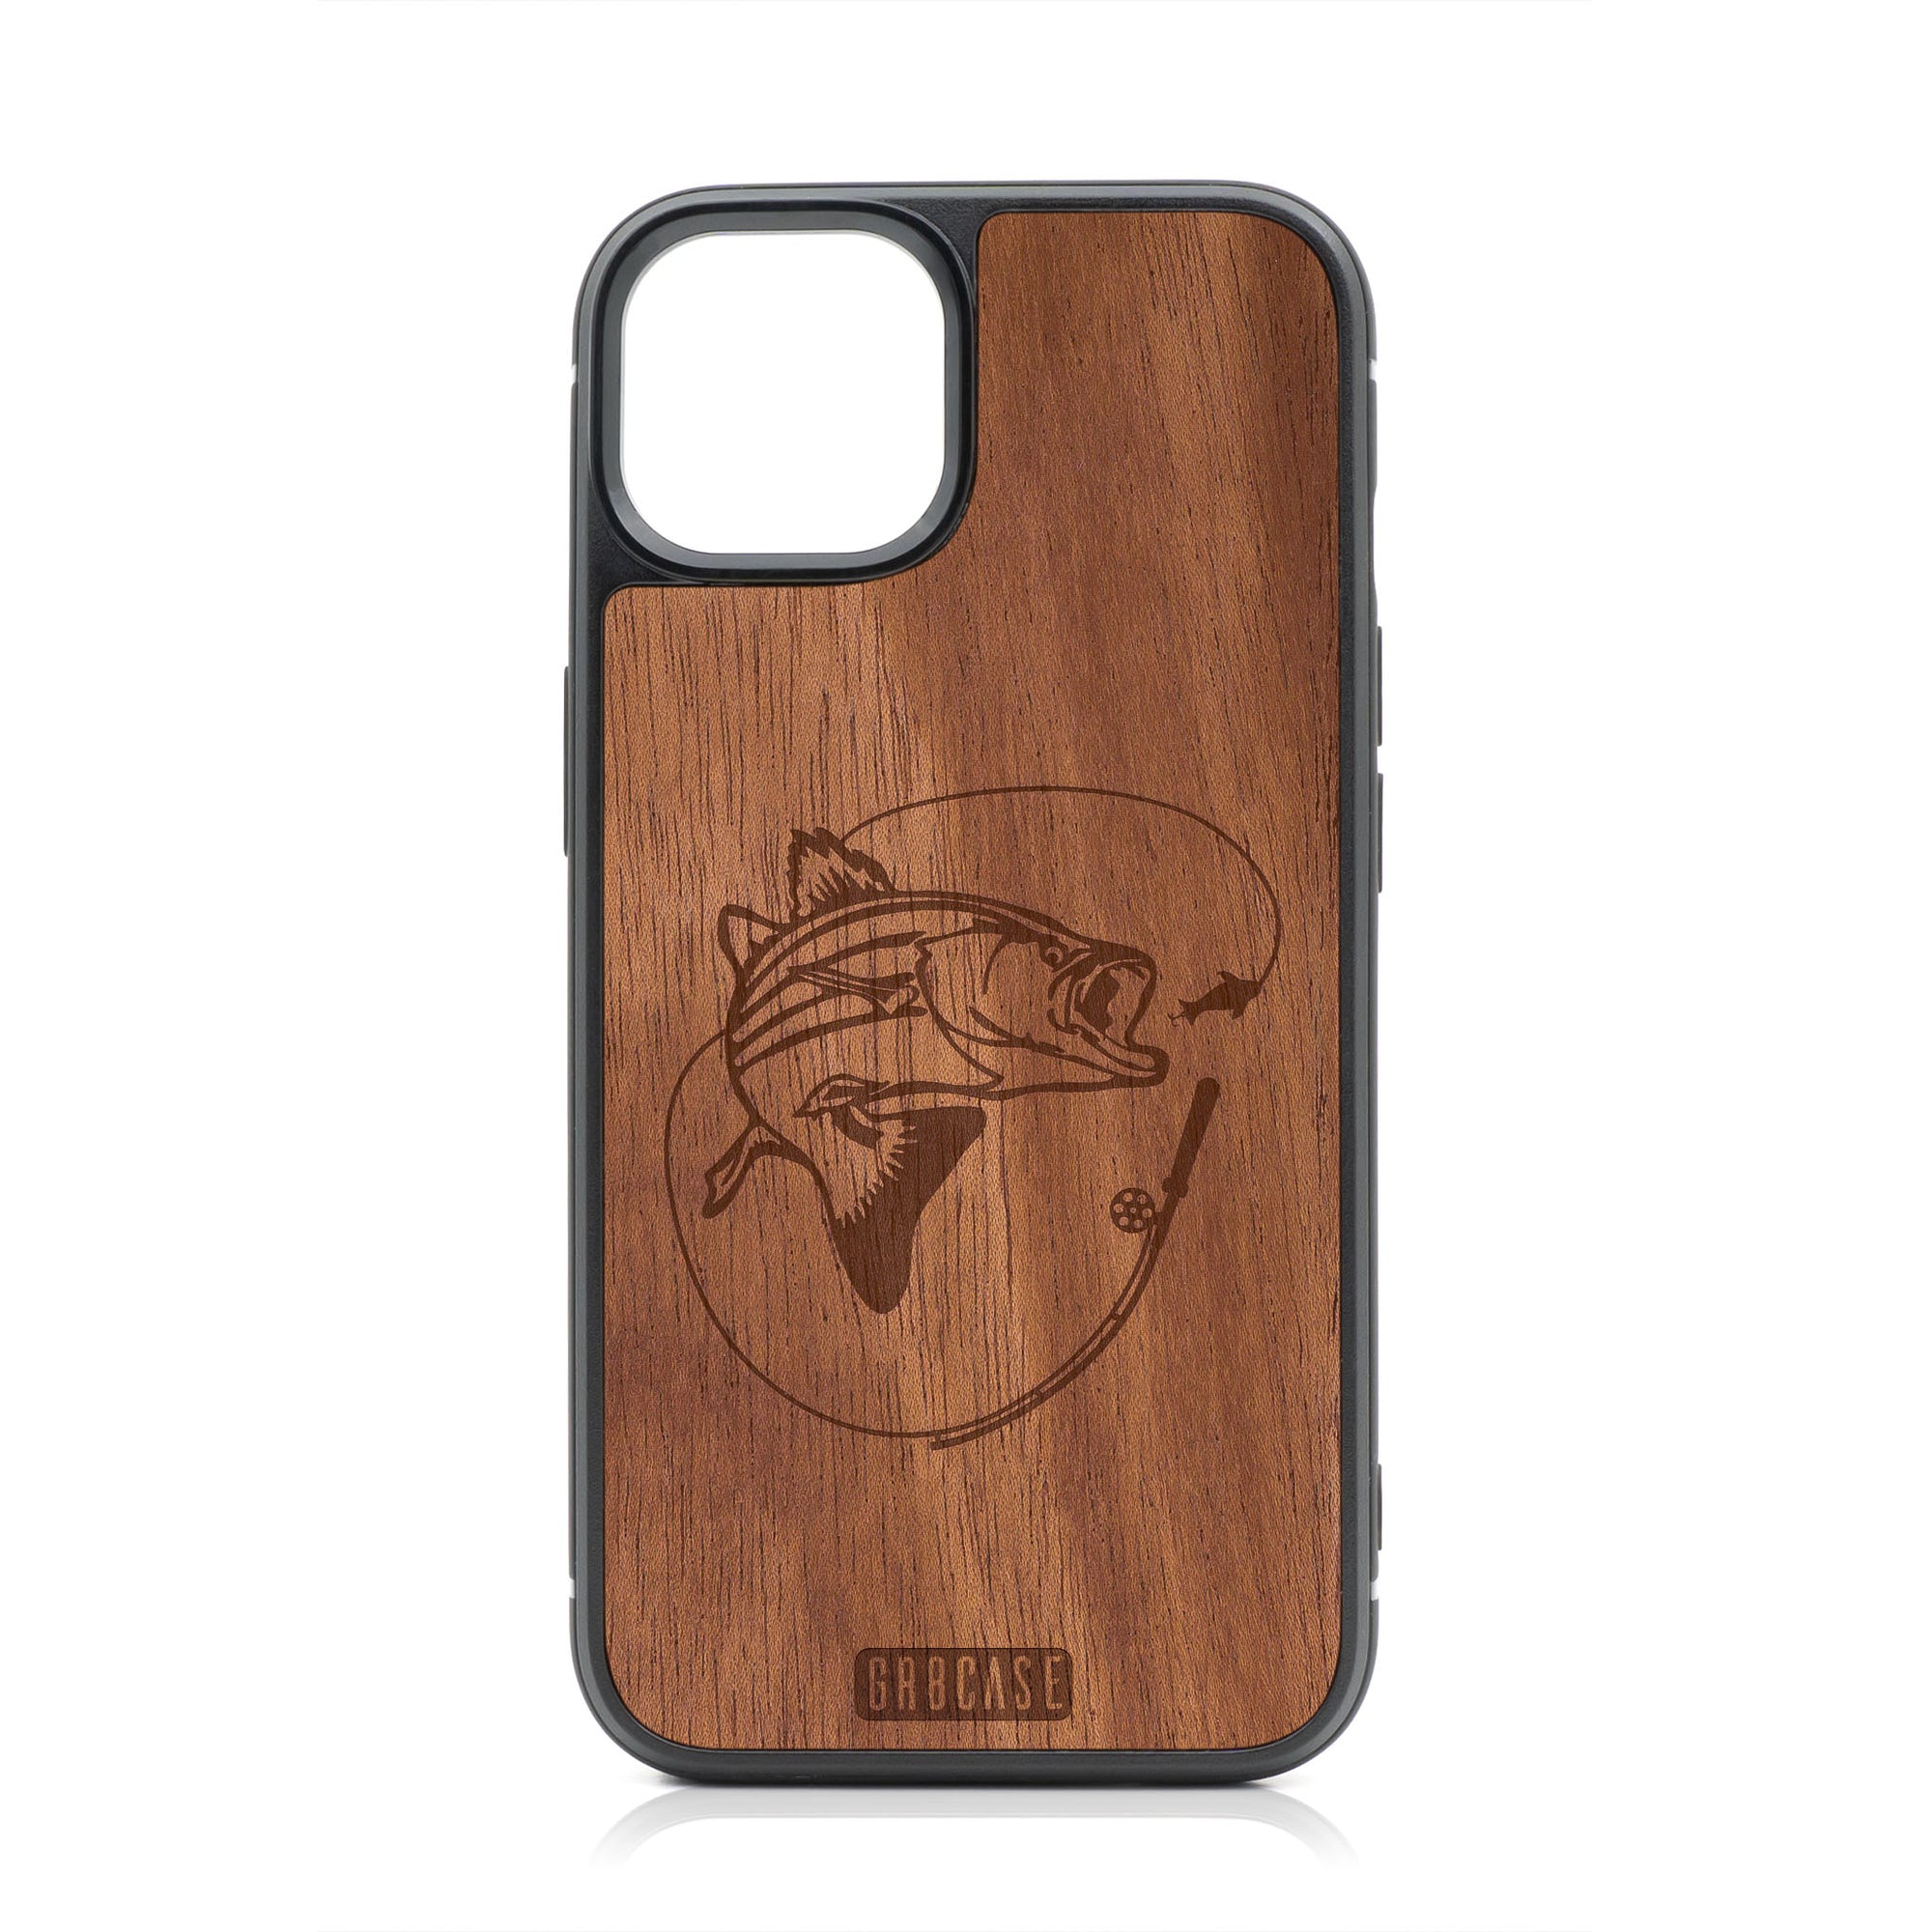 Fish and Reel Design Wood Case For iPhone 13